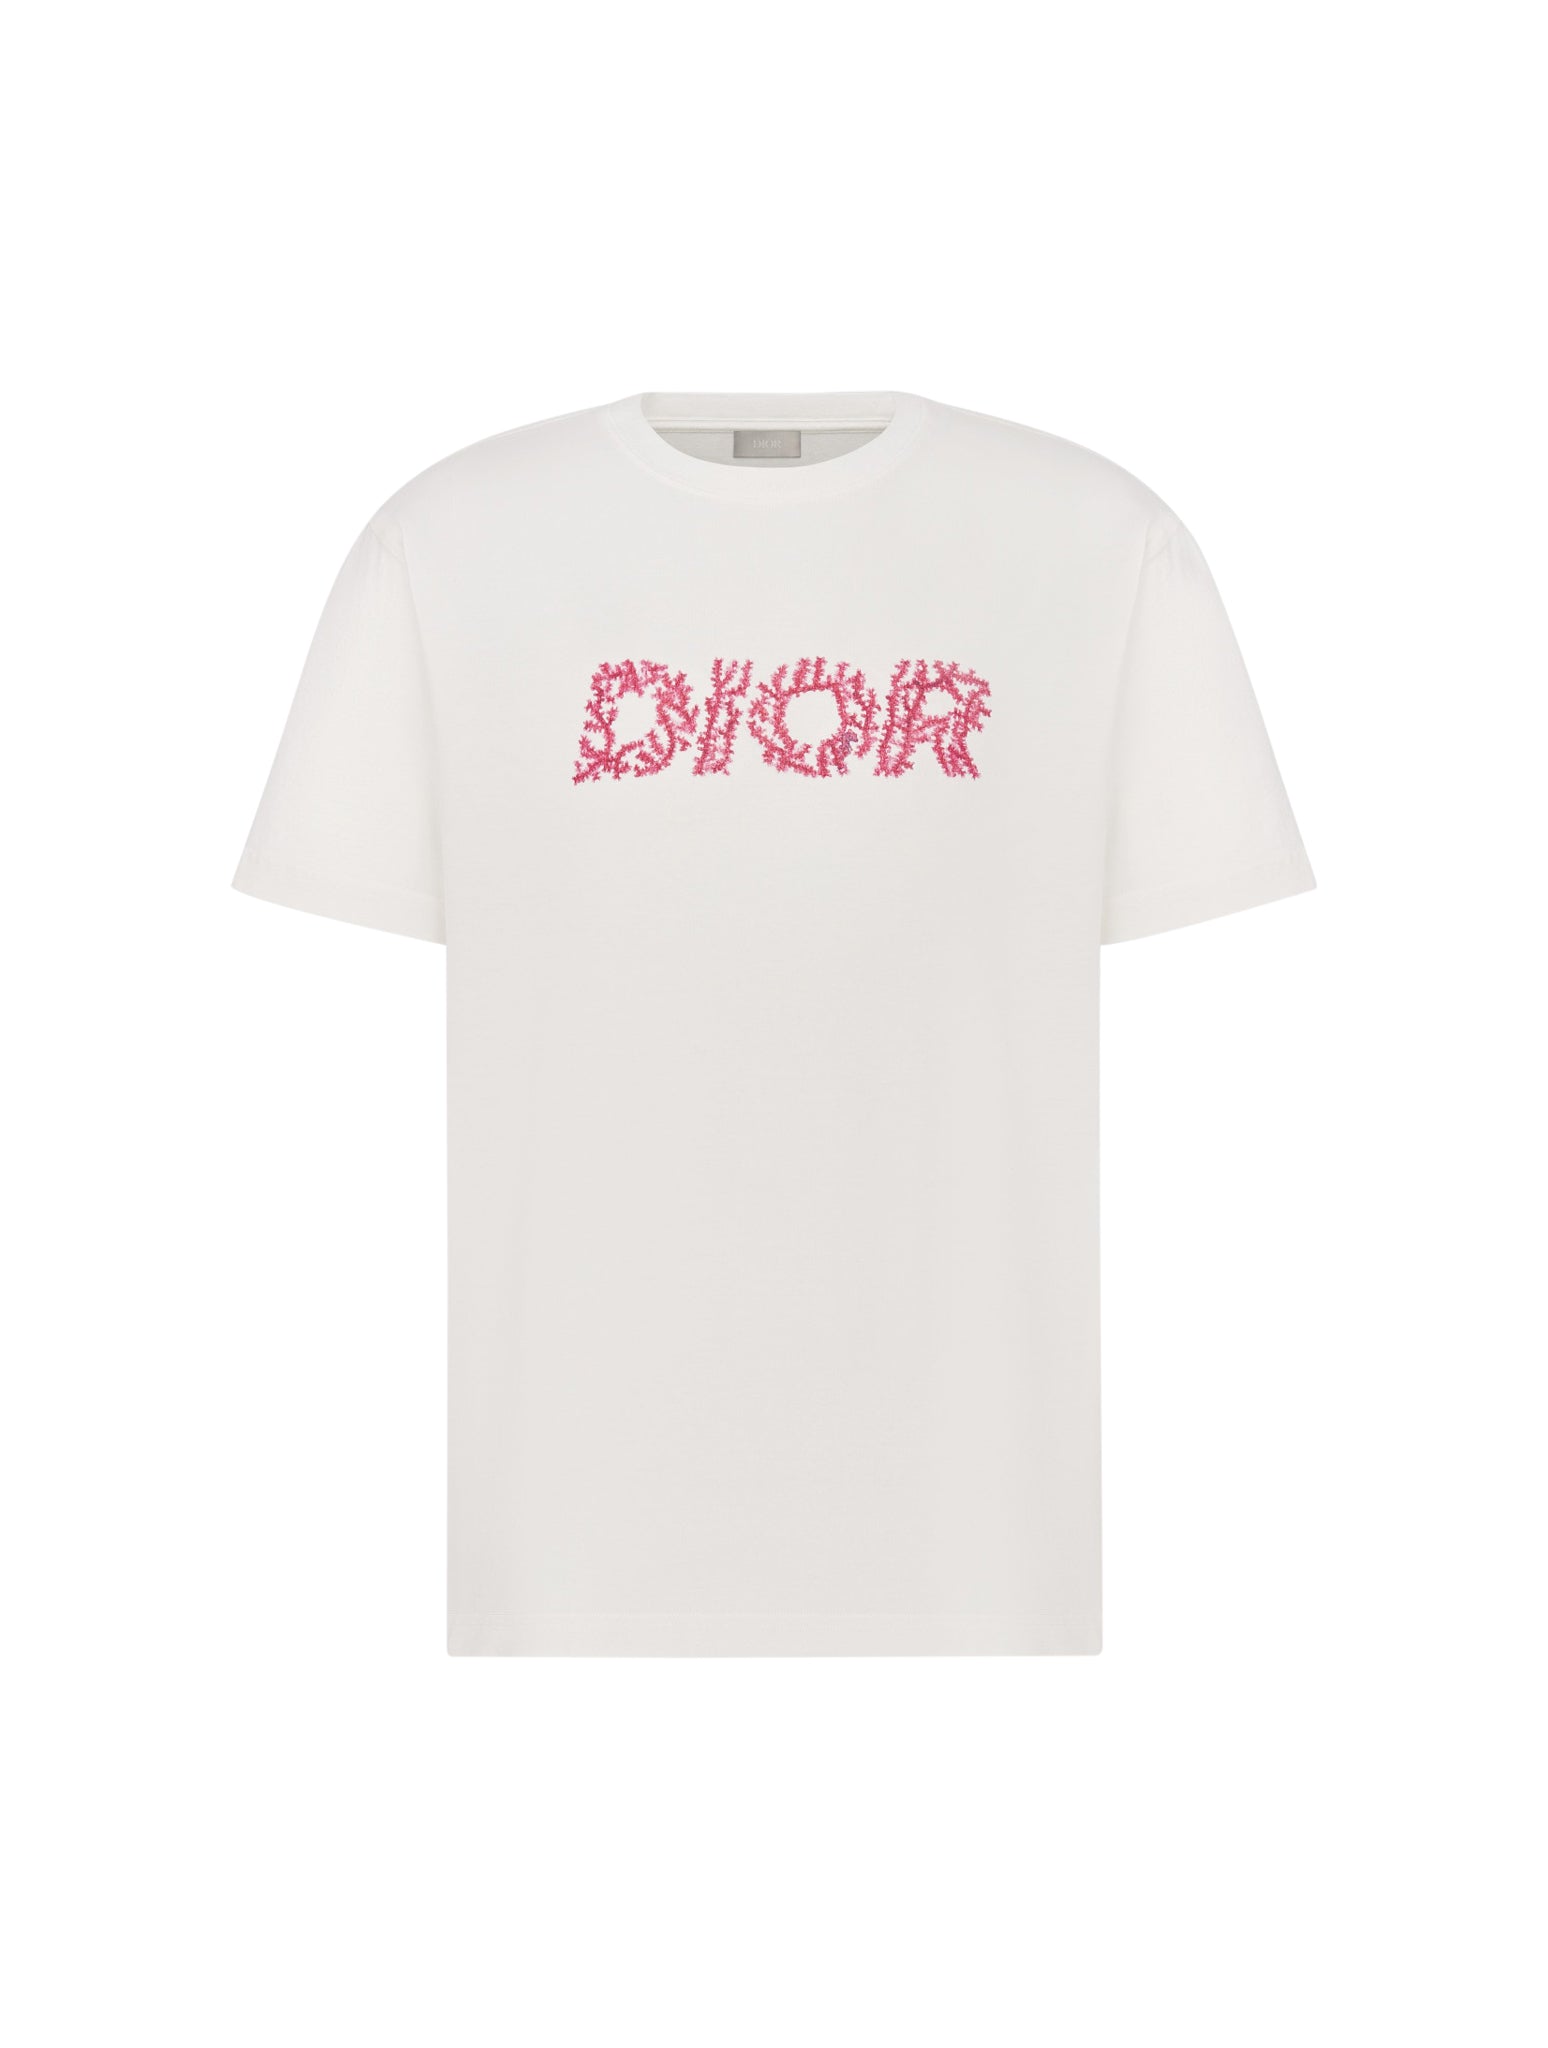 Dior Italic T-shirt With Coral Motif In White